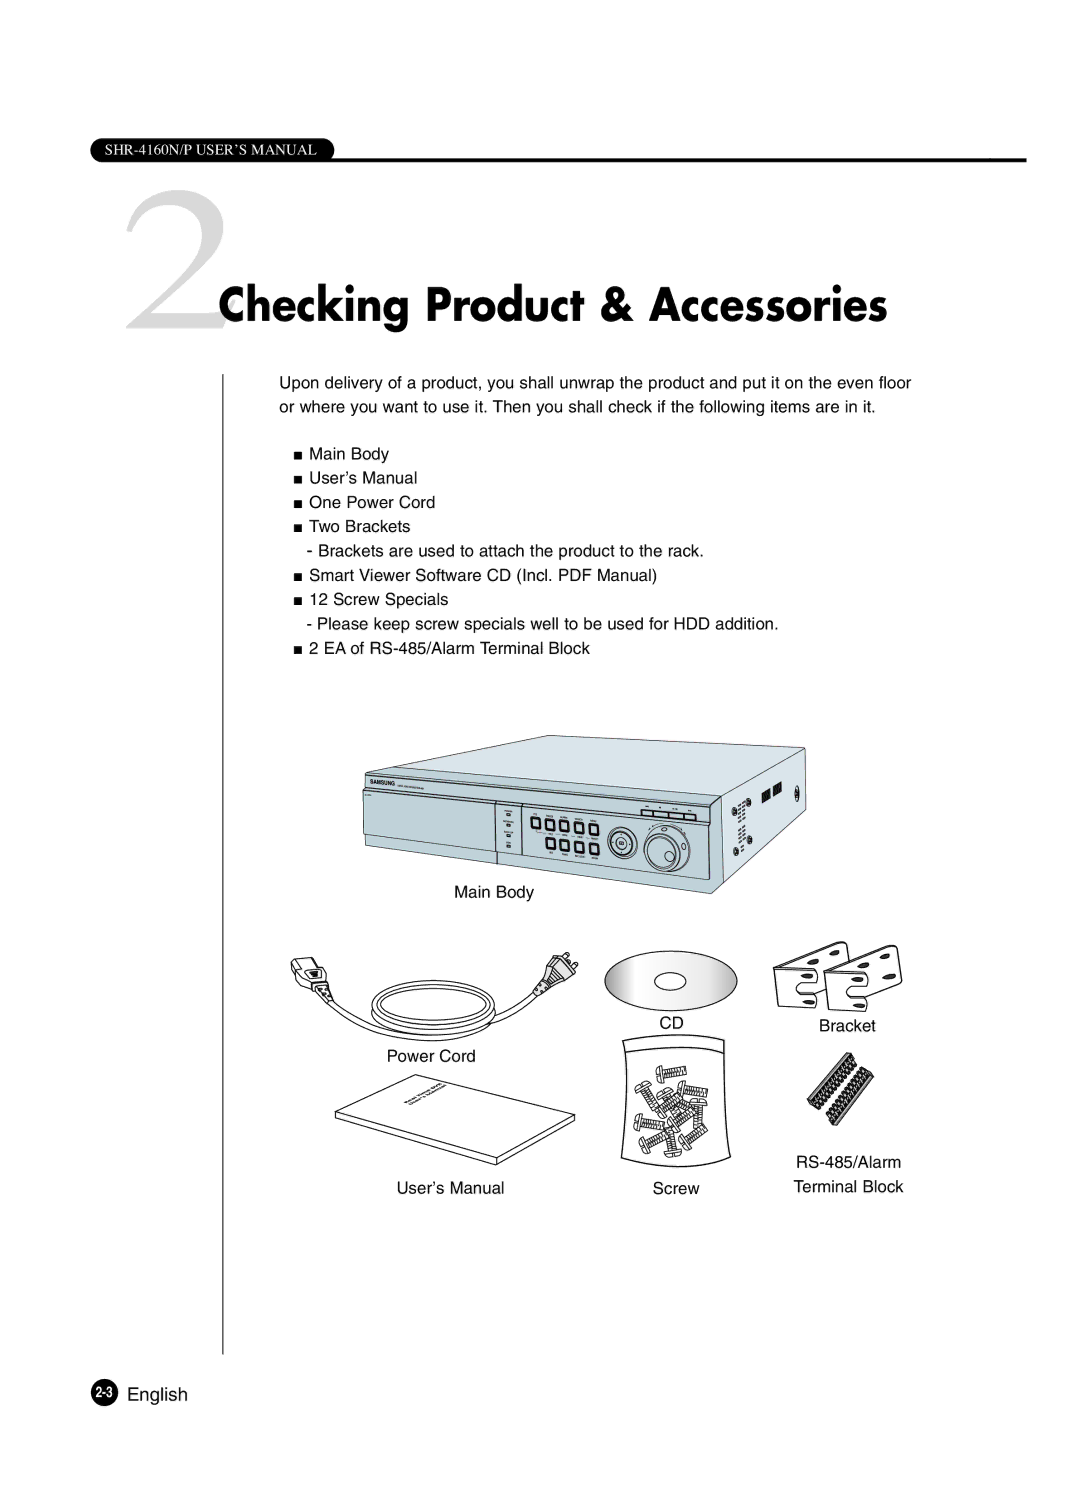 Samsung SHR-4160P manual 2Checking Product & Accessories, 3English 